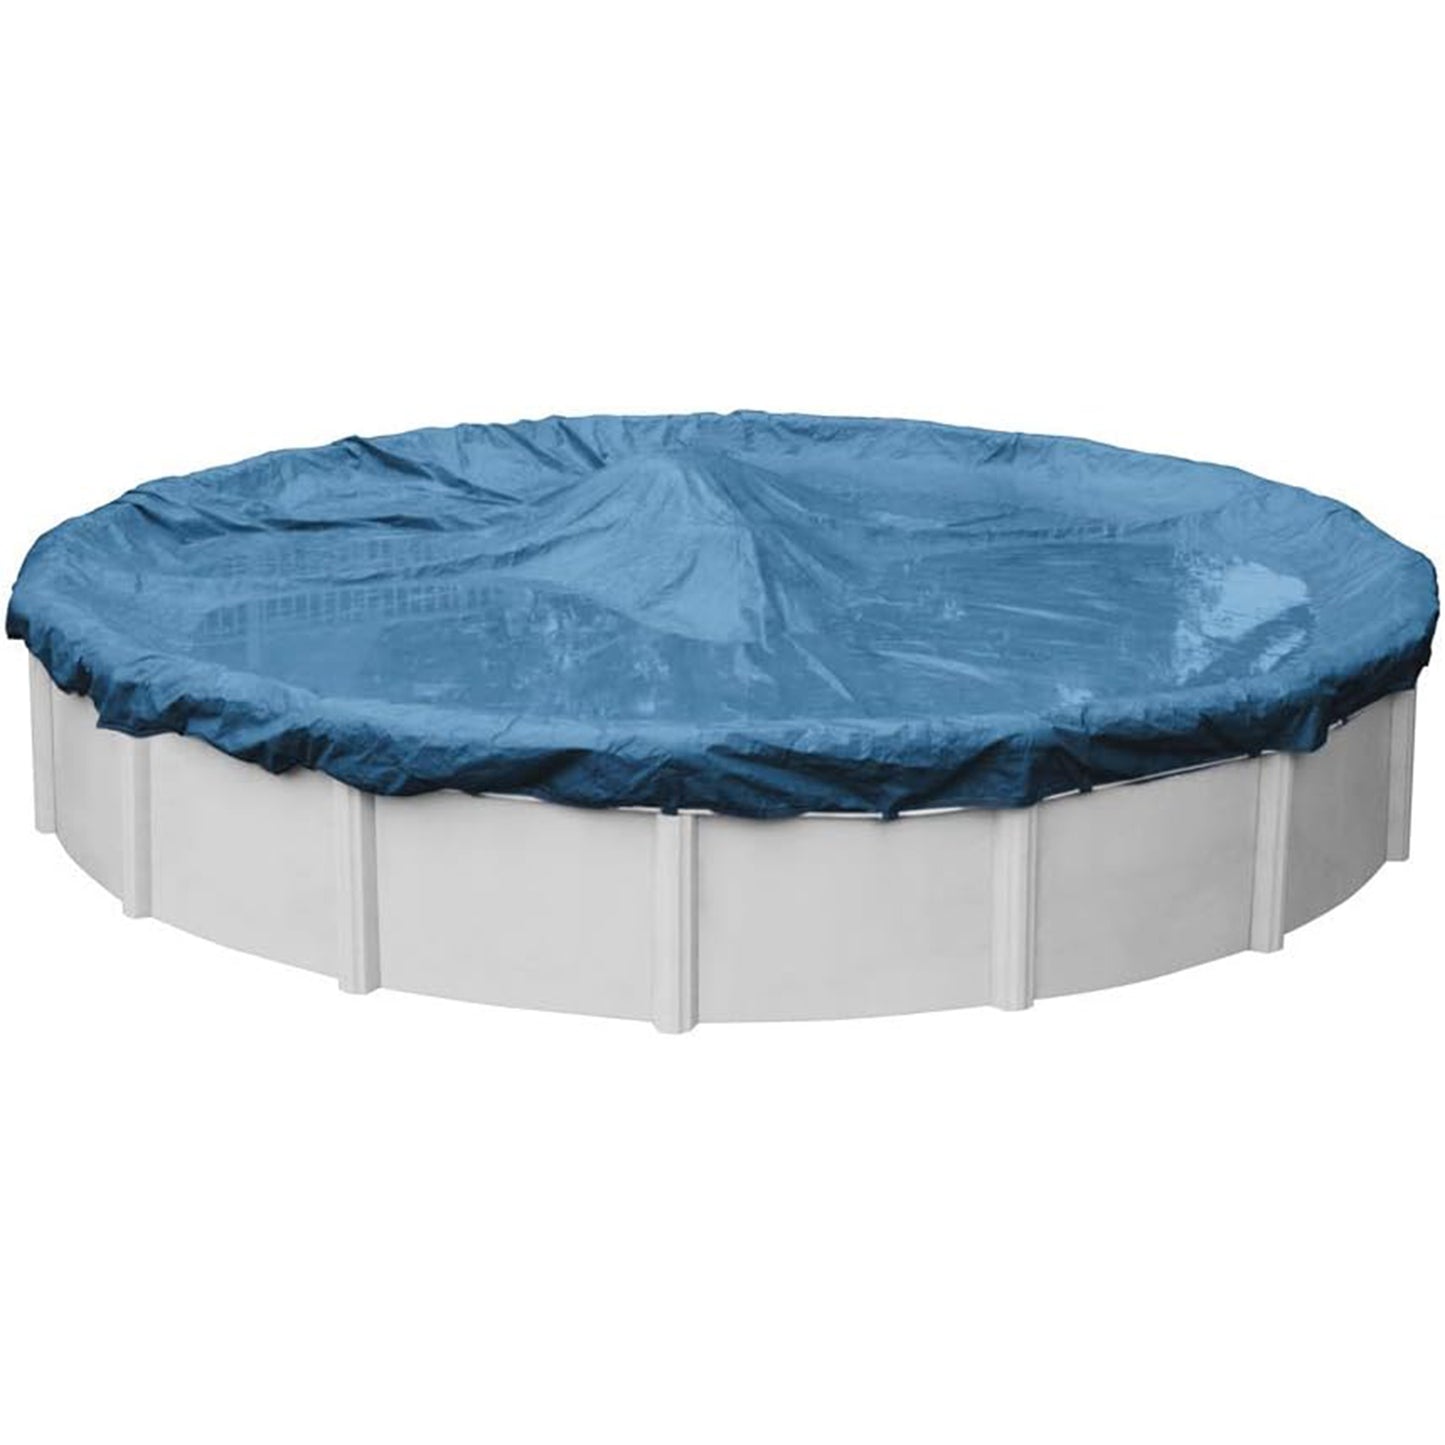 GLI 15-Foot Round Above Ground Estate Solid Winter Cover With 3-Foot Overlap | 45-0015RD-EST-3-BX